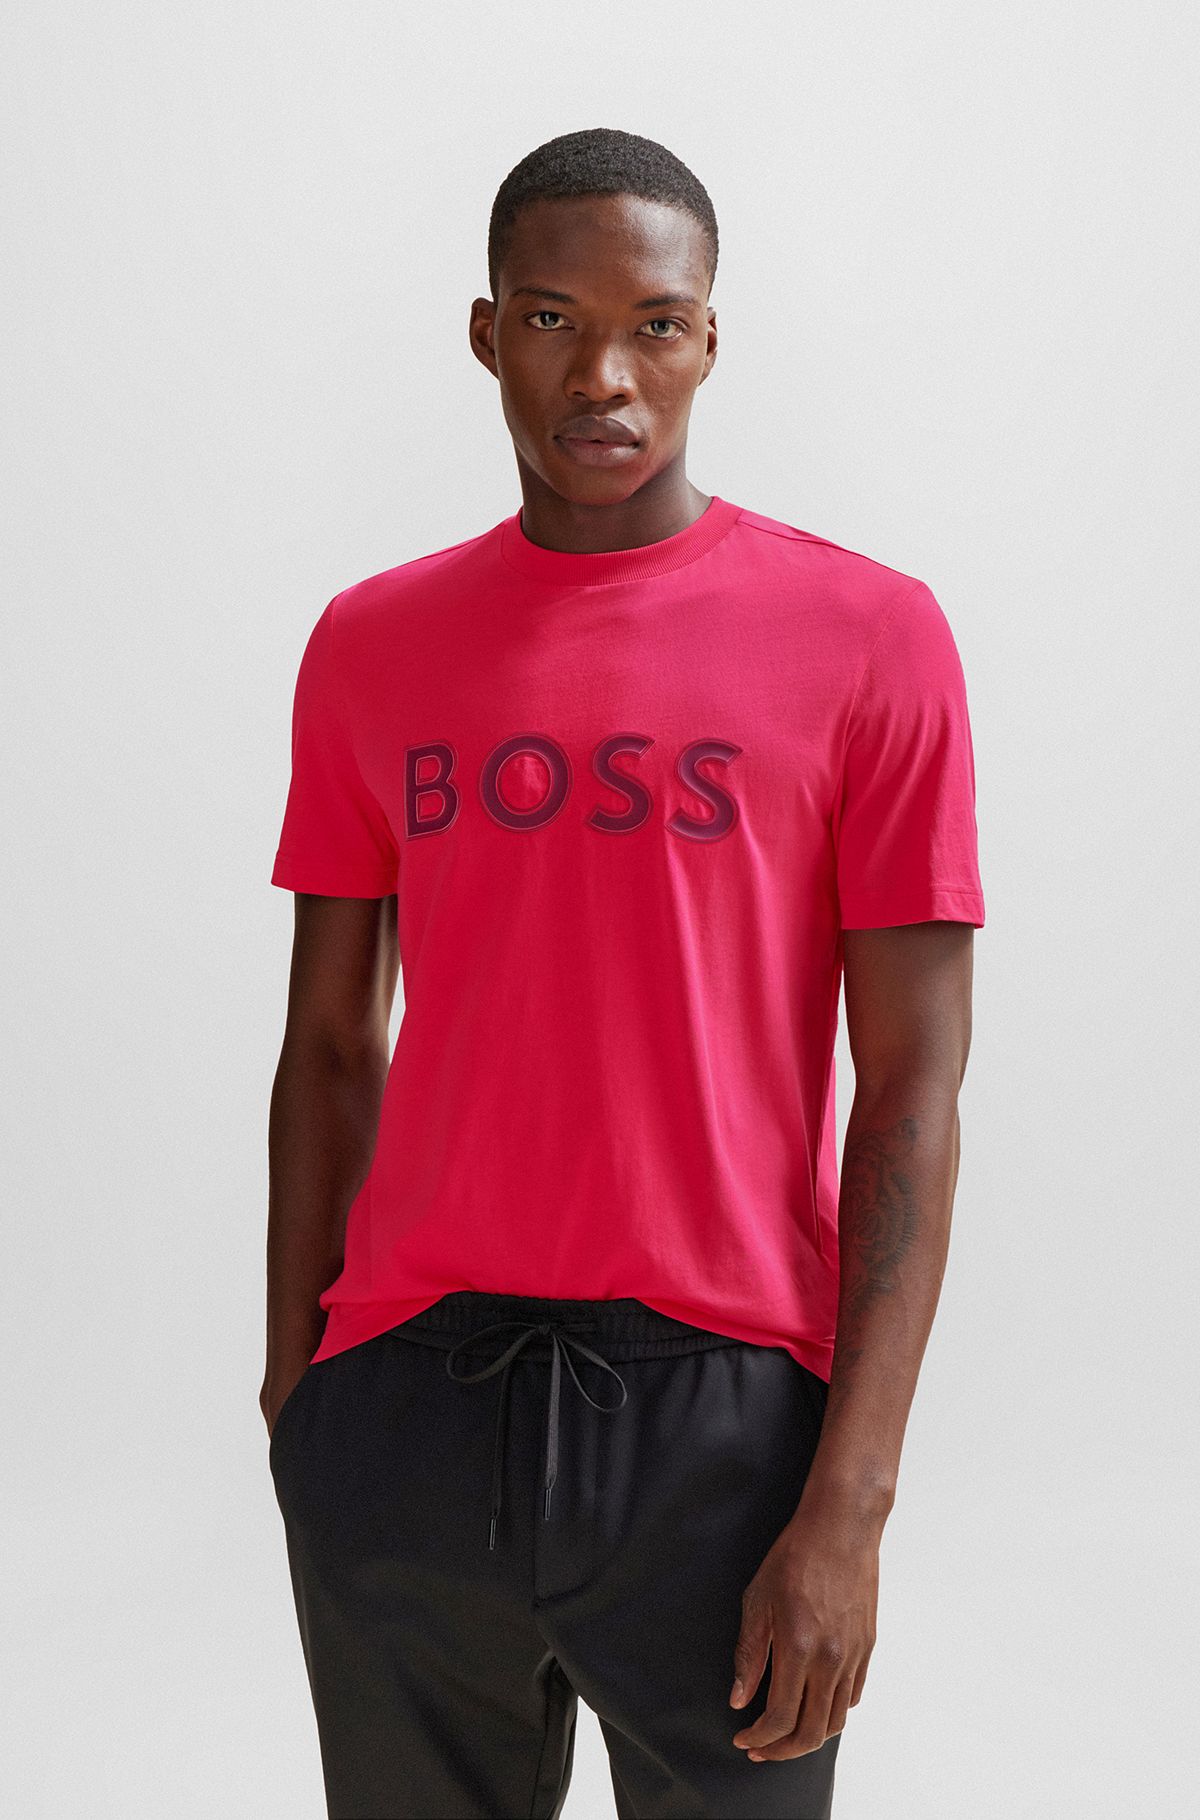 T-Shirts in BOSS Pink by HUGO Men 